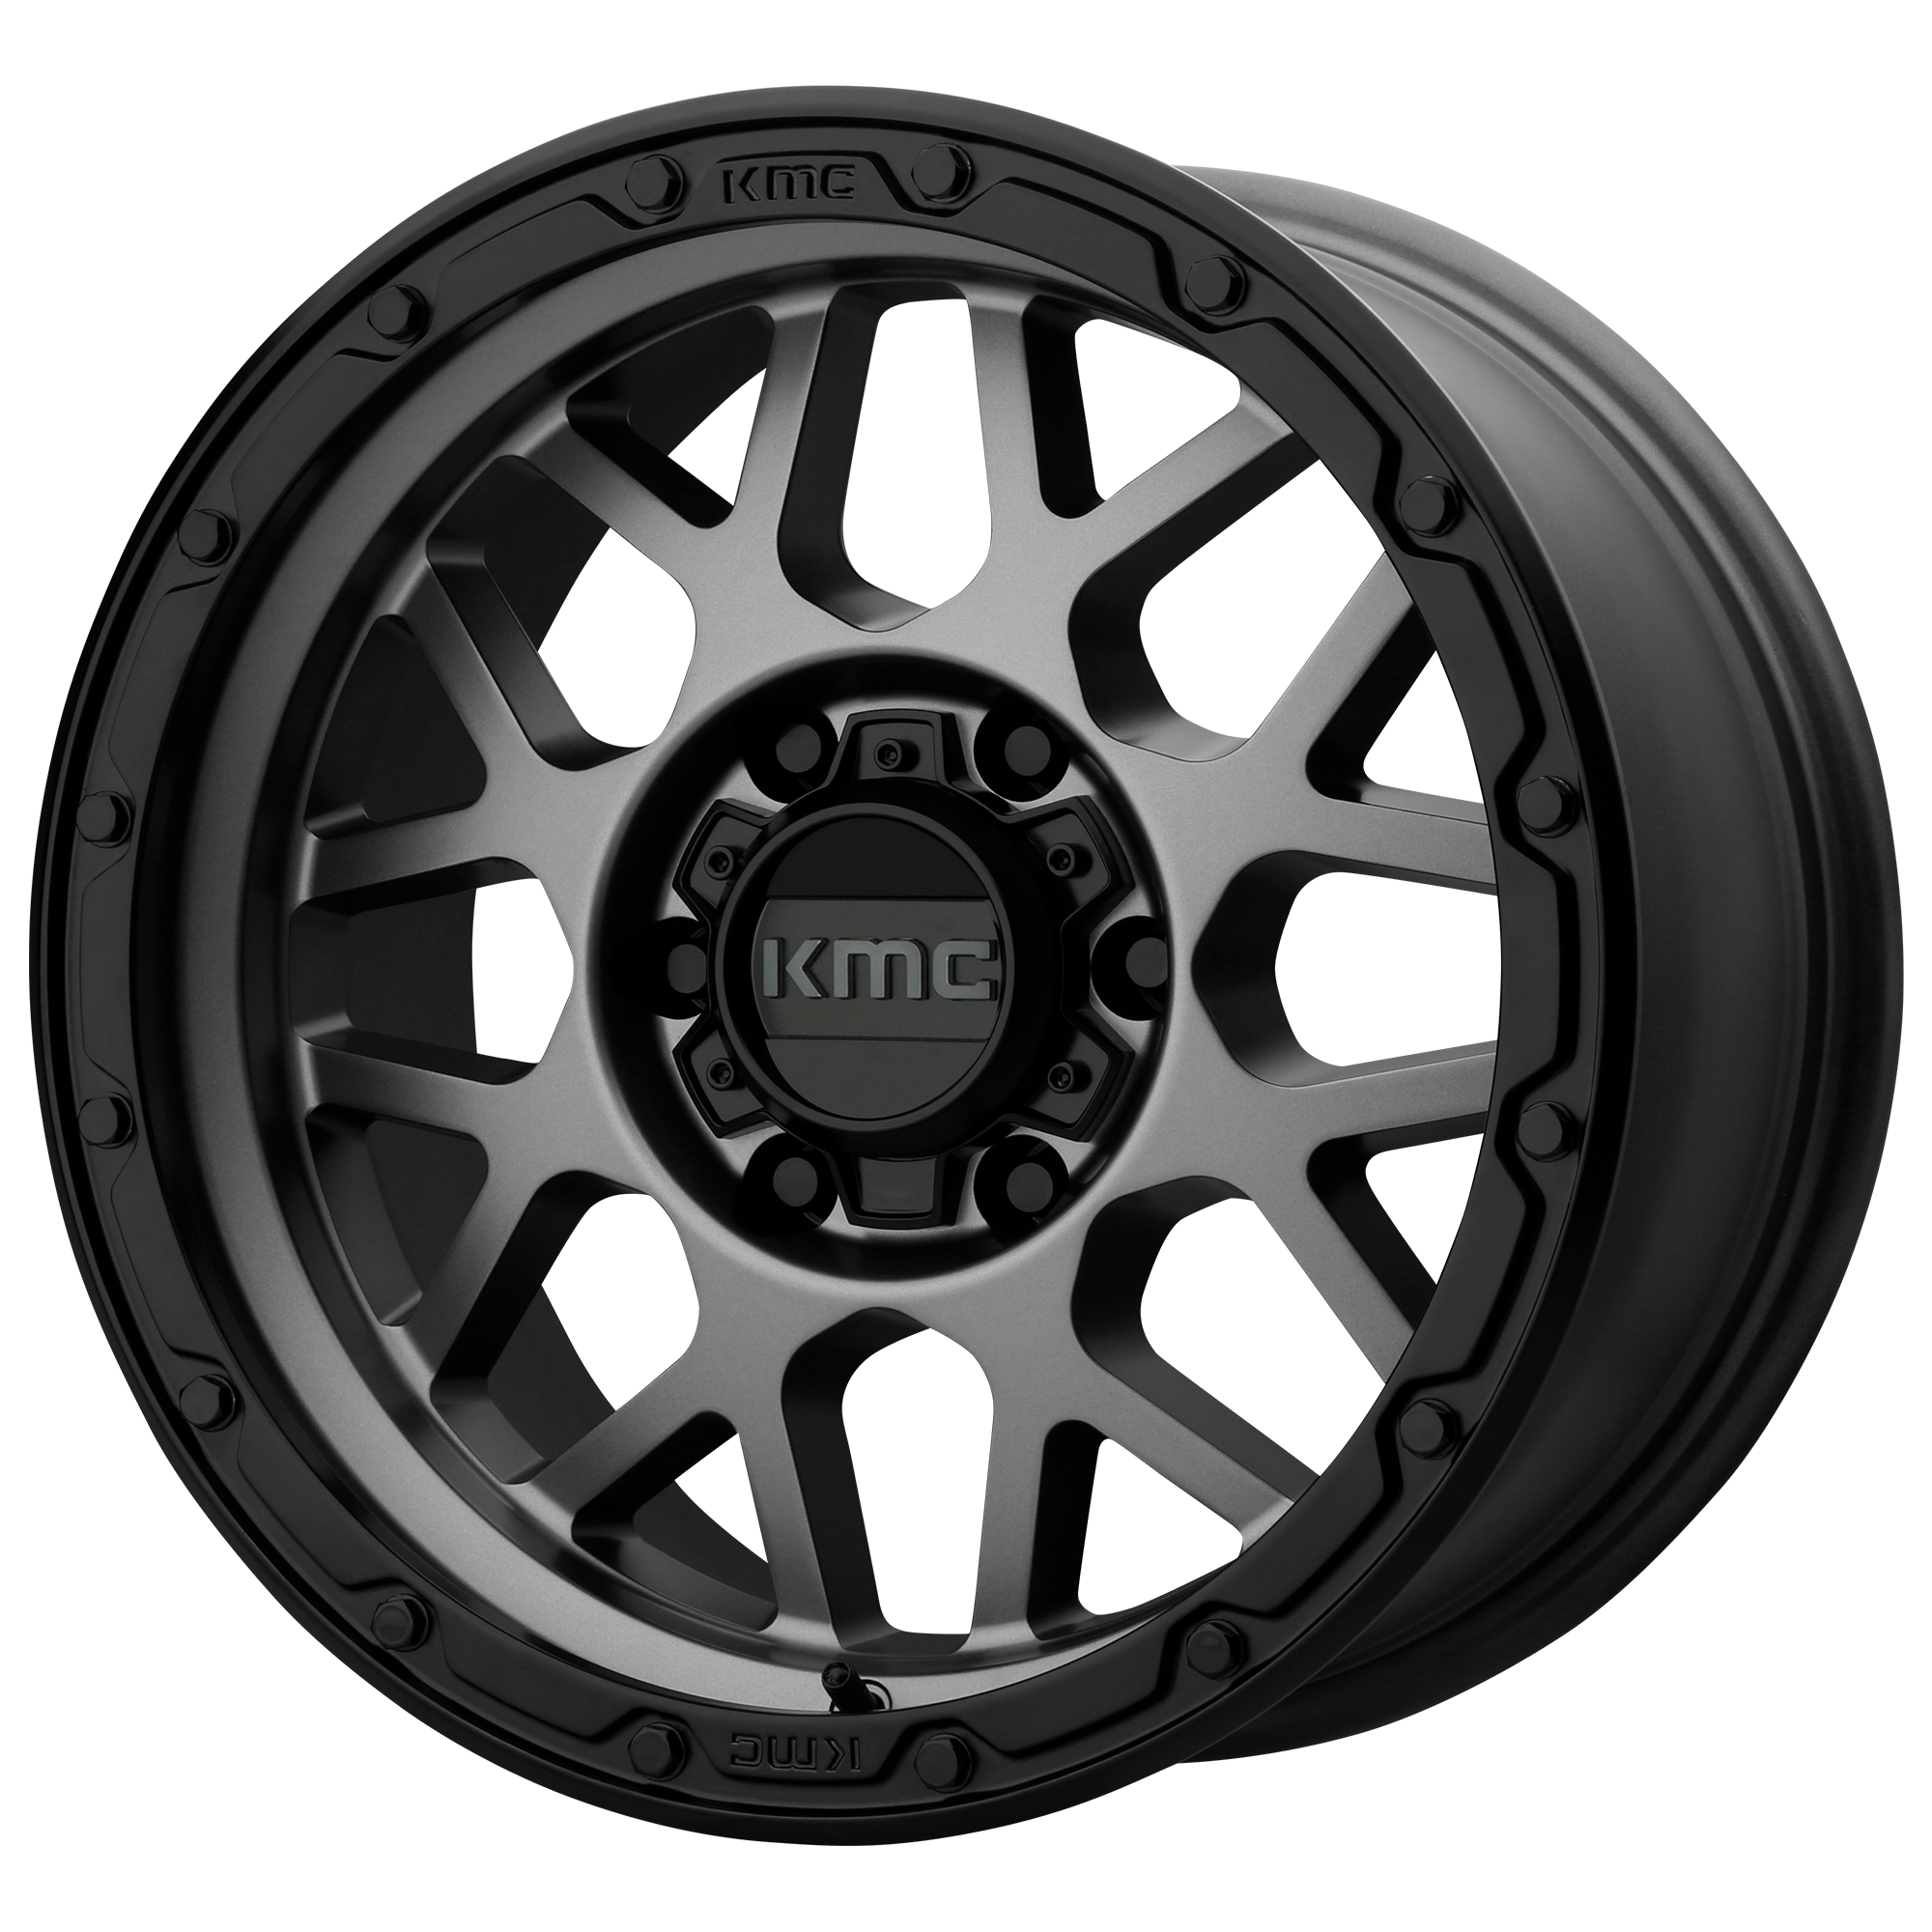 GRENADE OFF-ROAD 20x9 6x114.30 MATTE GRAY W/ MATTE BLACK LIP (18 mm) - Tires and Engine Performance